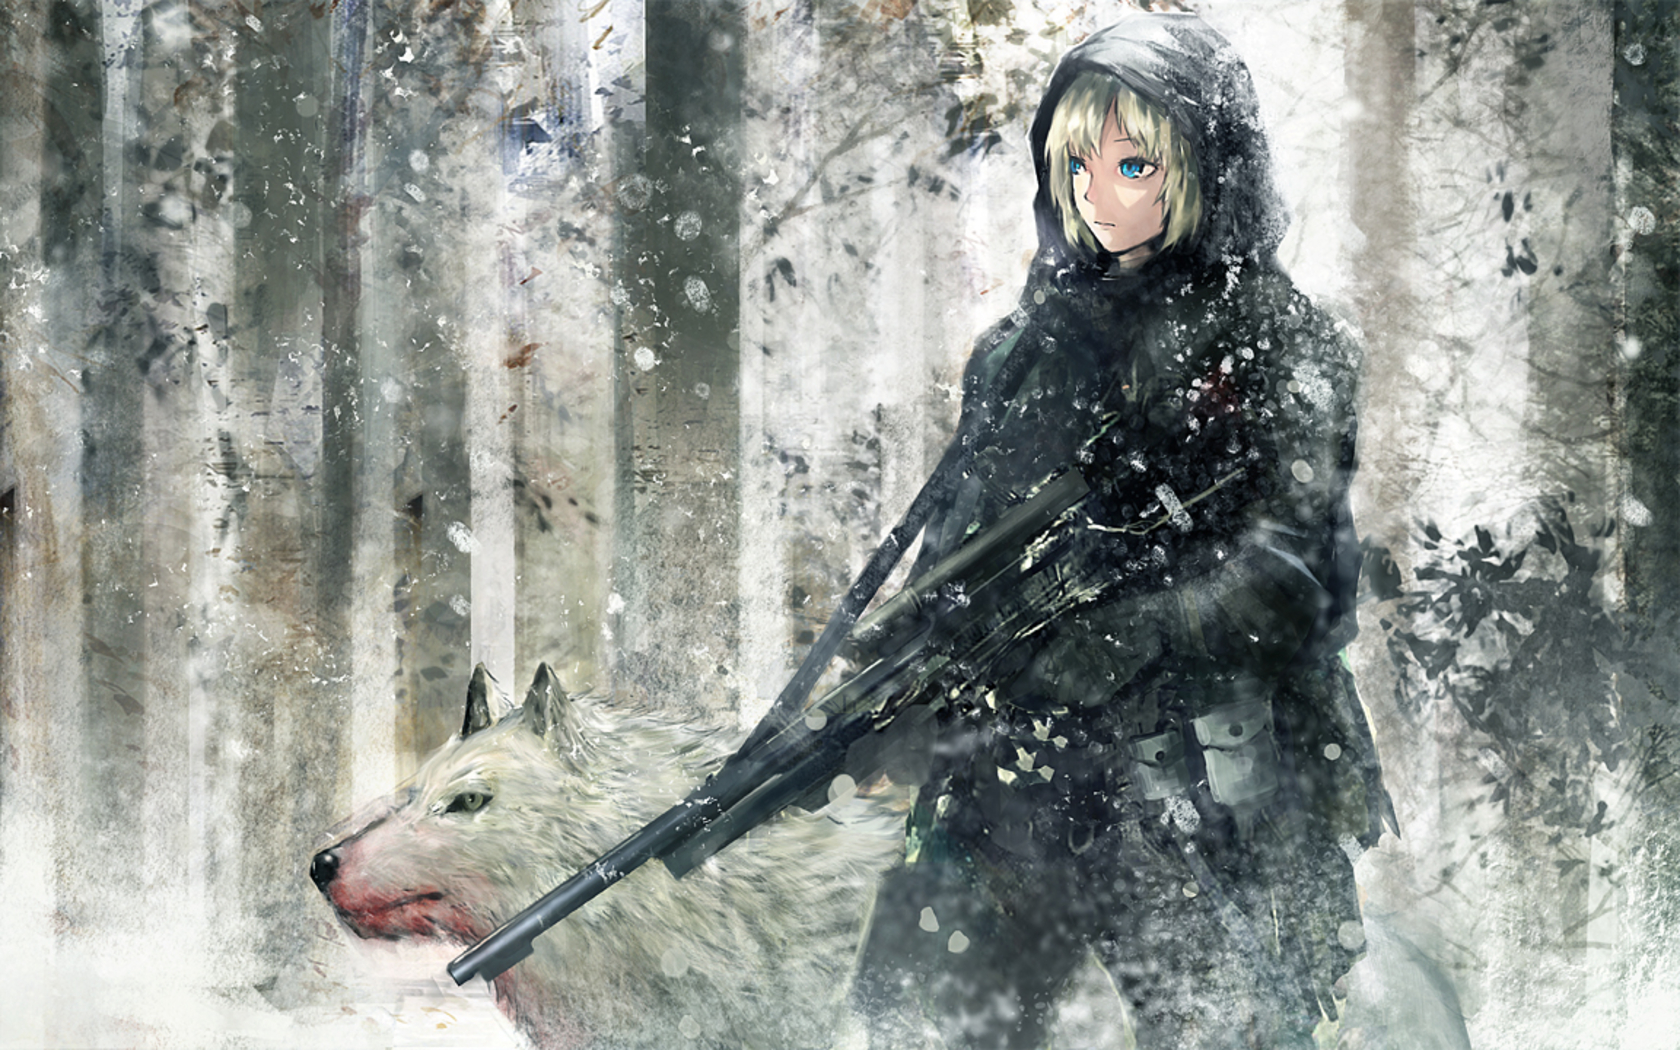 Anime Wallpapers » Anime, Anime Girls, Wolf, Snow, - Anime Snowy Forest  Background - 1680x1050 Wallpaper 